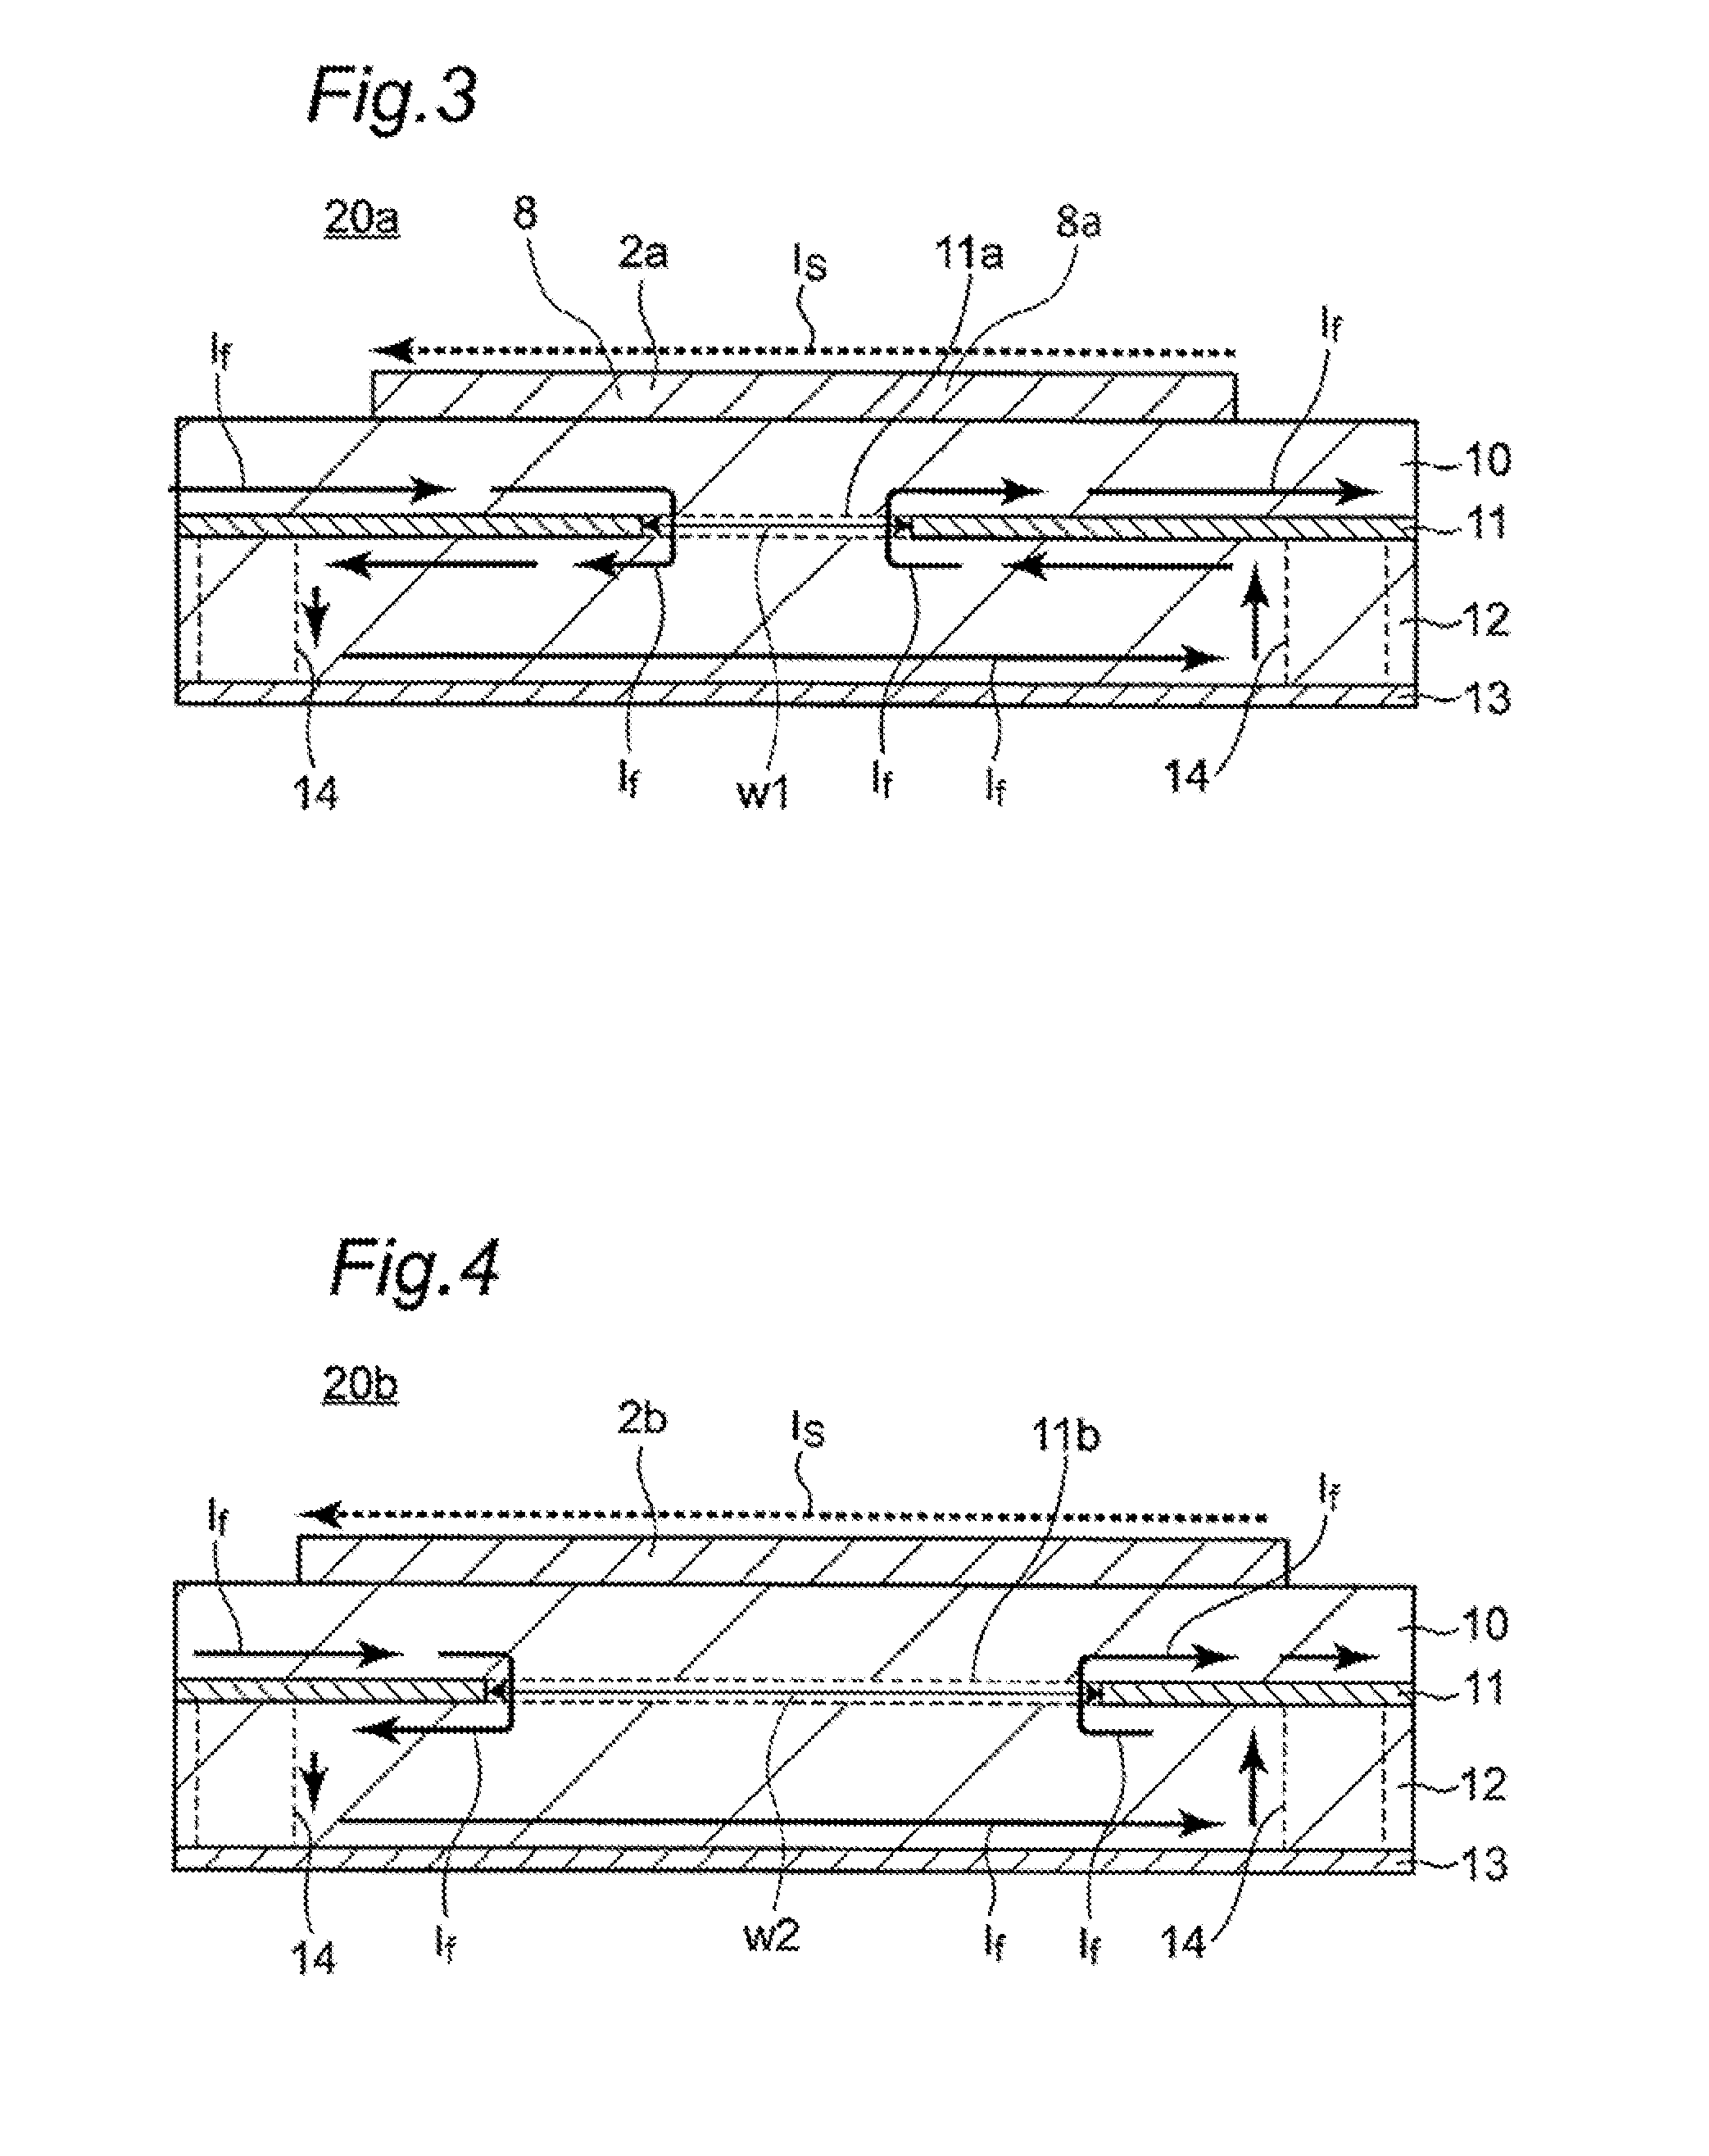 Parallel differential transmission lines having an opposing grounding conductor separated into two parts by a slot therein